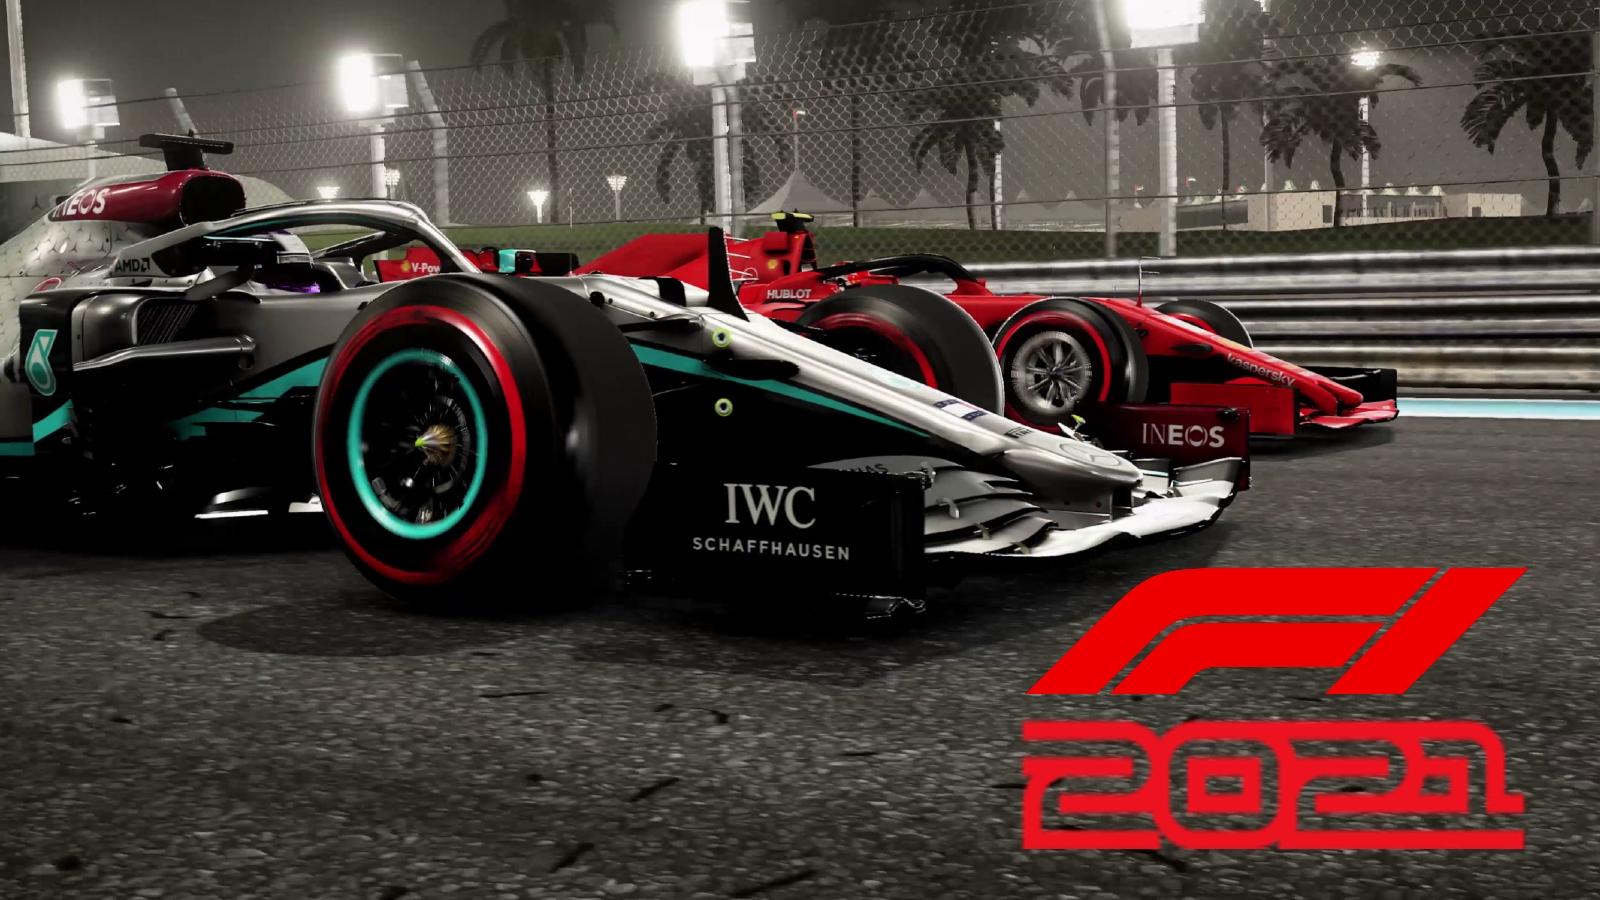 My Team - access, early F1 2021 Dexerto game: date, trailer, EA Play, Release